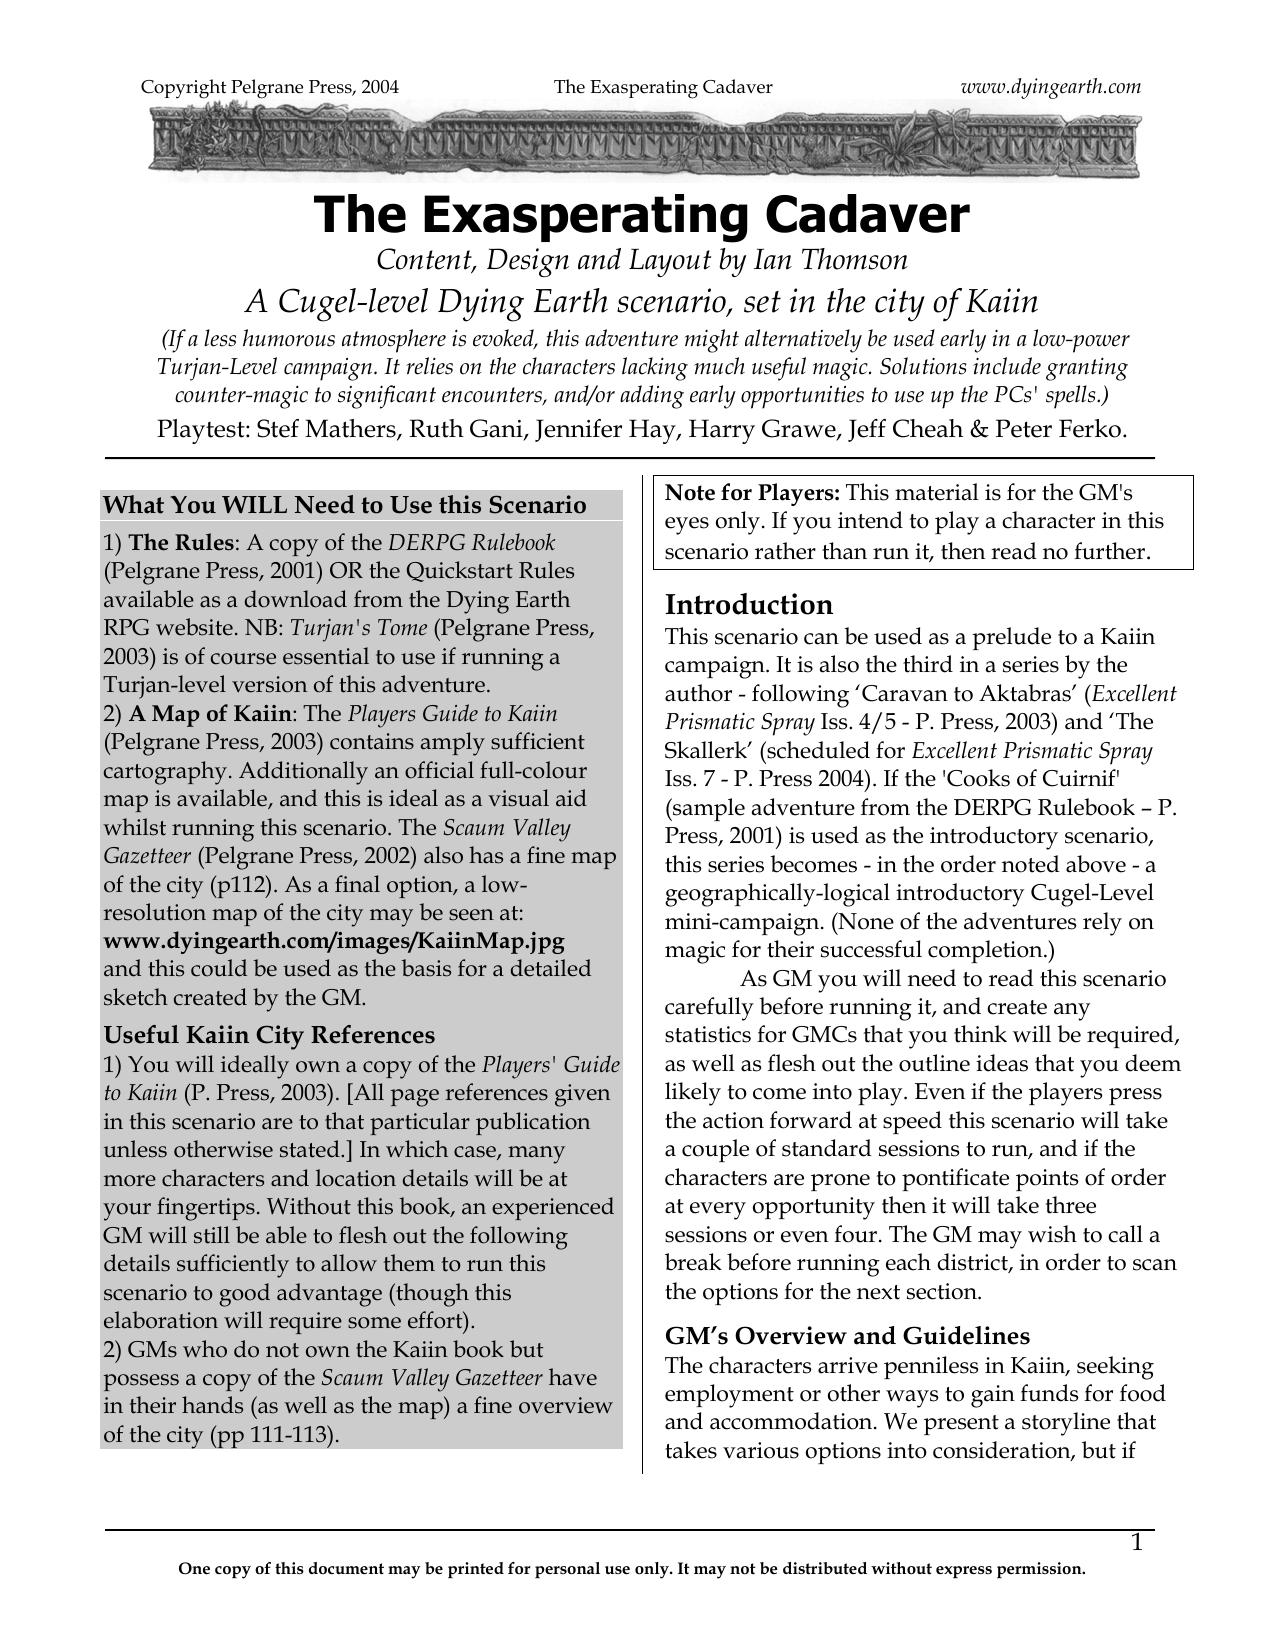 The Case of the Exasperating Cadaver